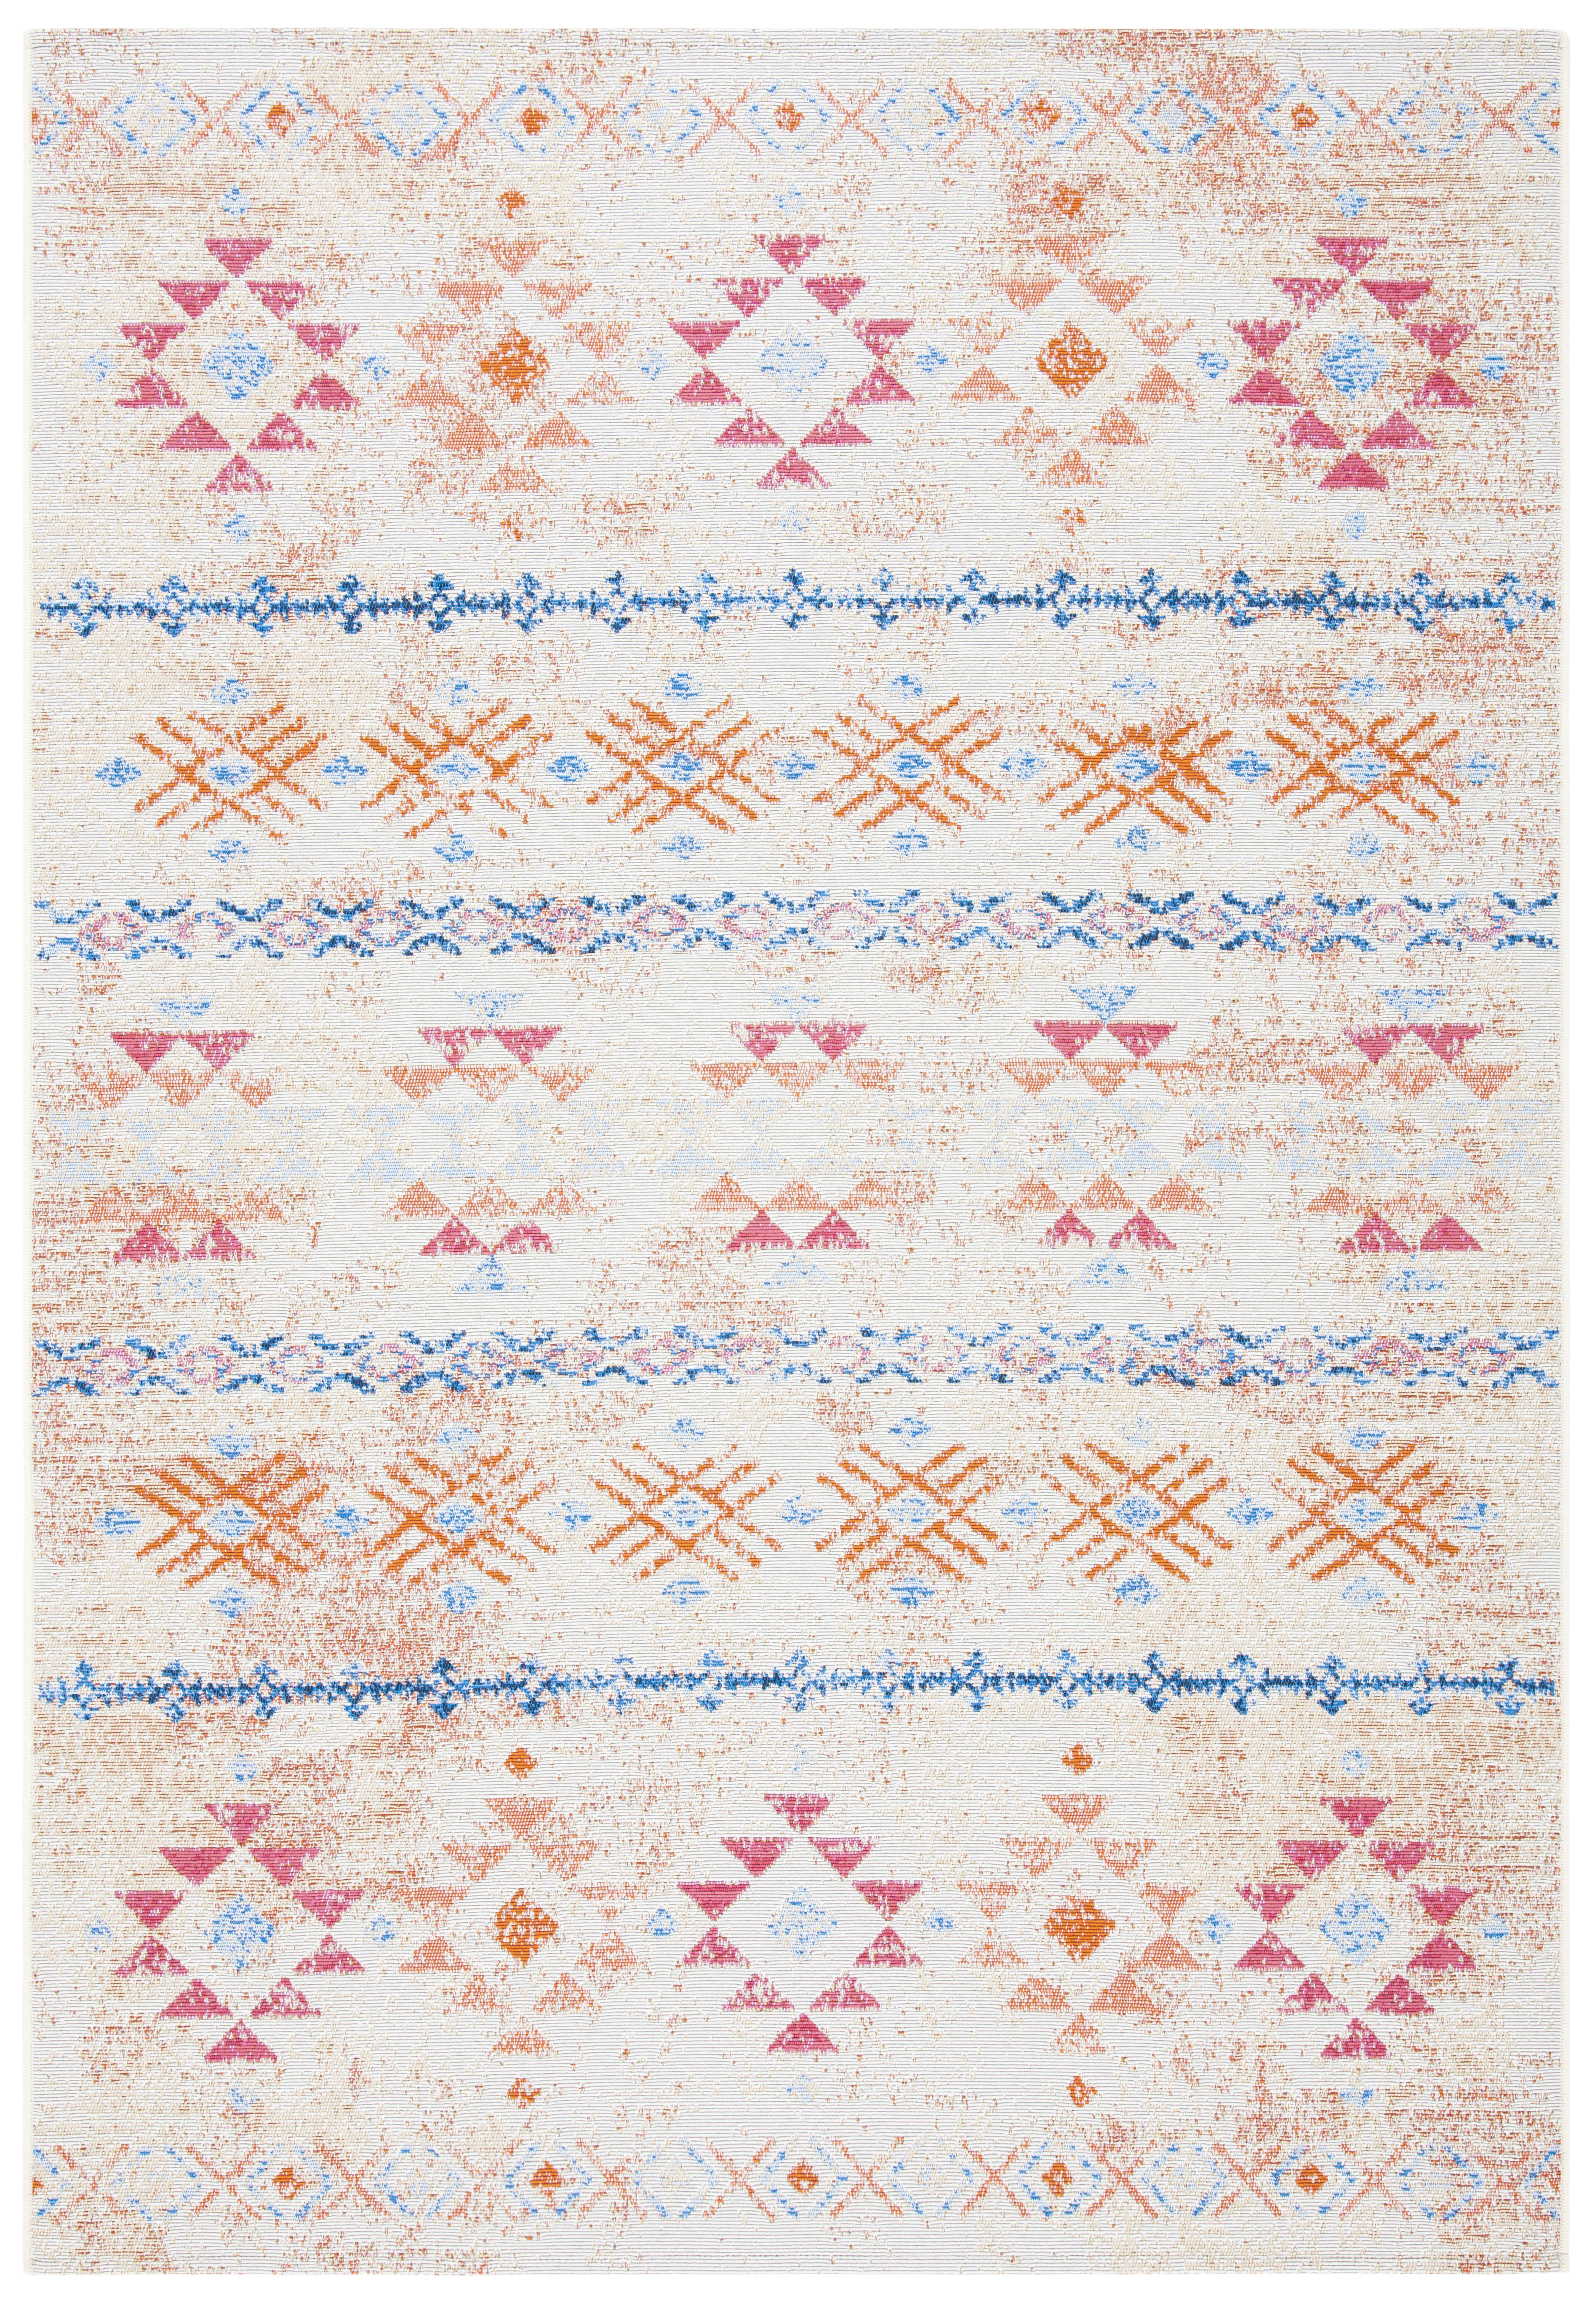 Safavieh Summer Donella Outdoor Boho Distressed Area Rug, Ivory/Red, 4' x 6' - image 2 of 6